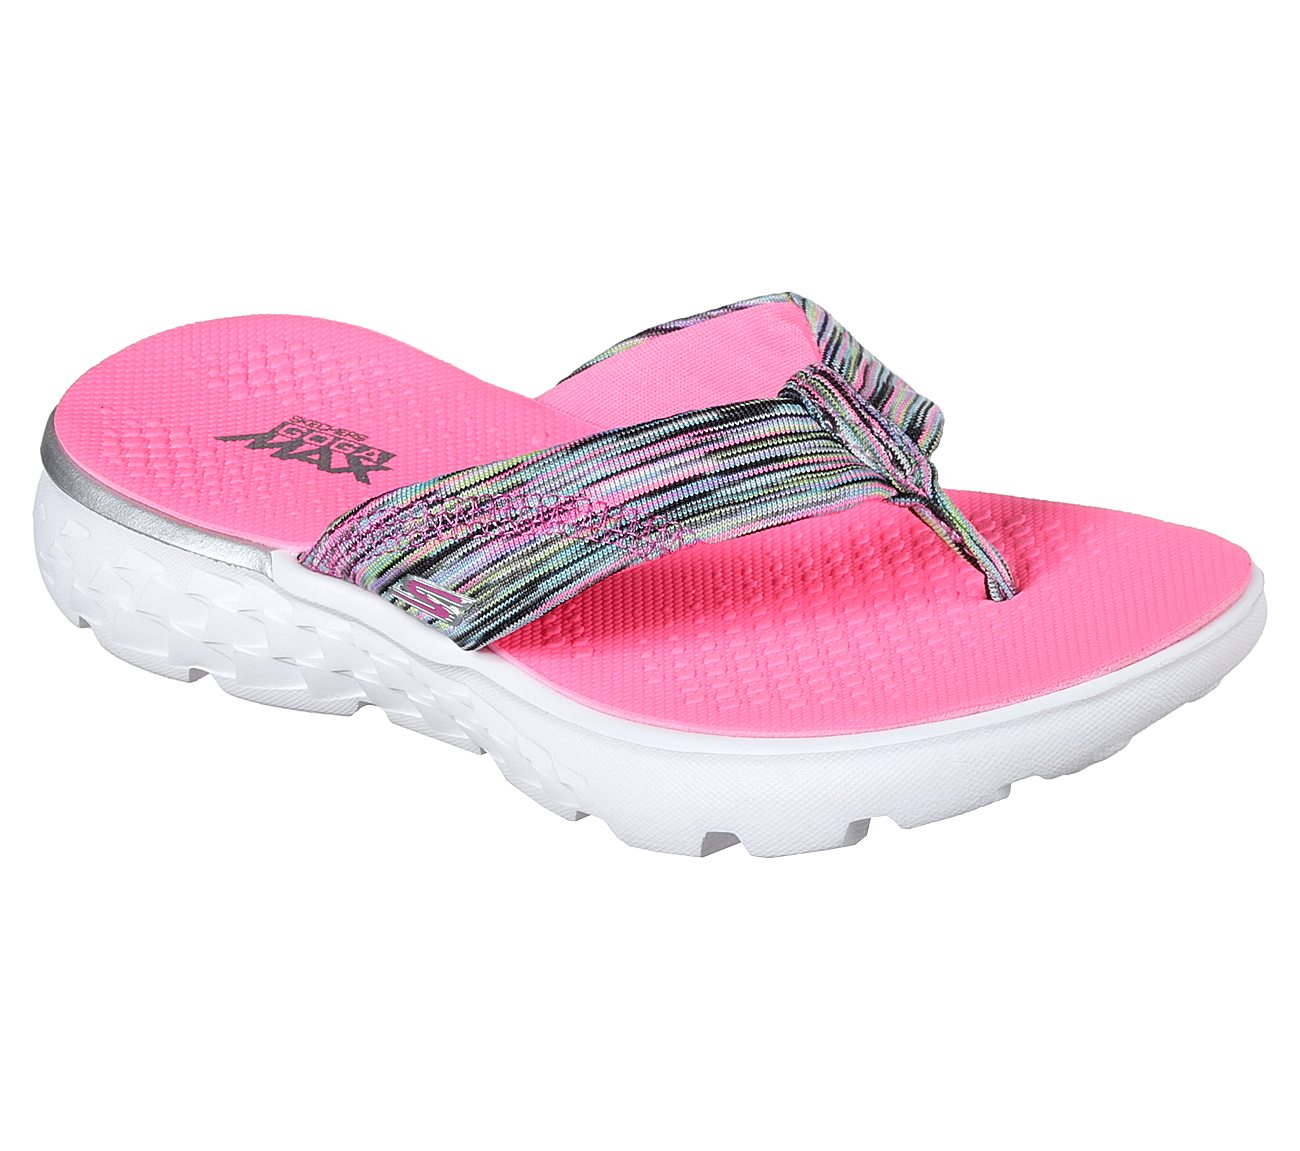 skechers on the go sandals 400